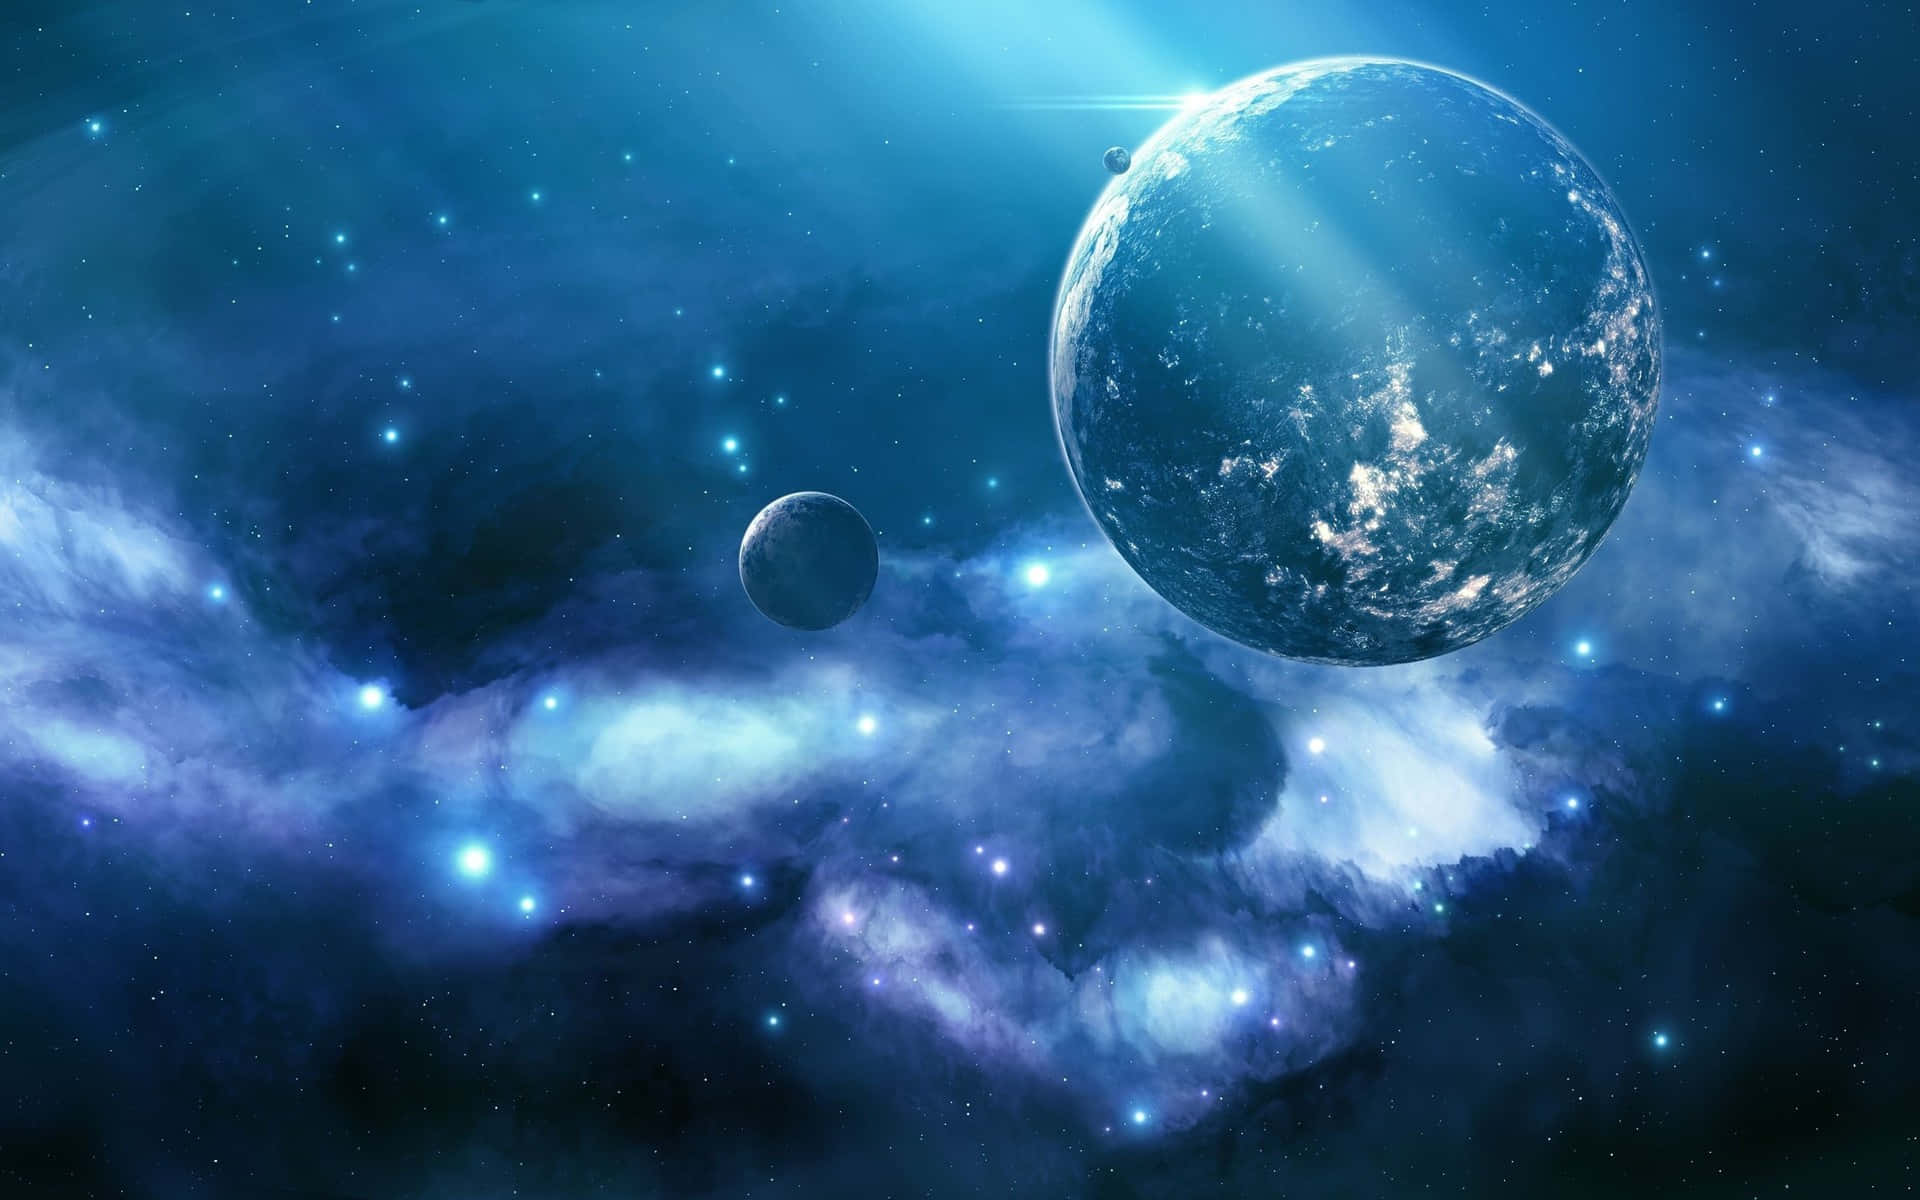 Get Lost in Galaxies and Planets Wallpaper